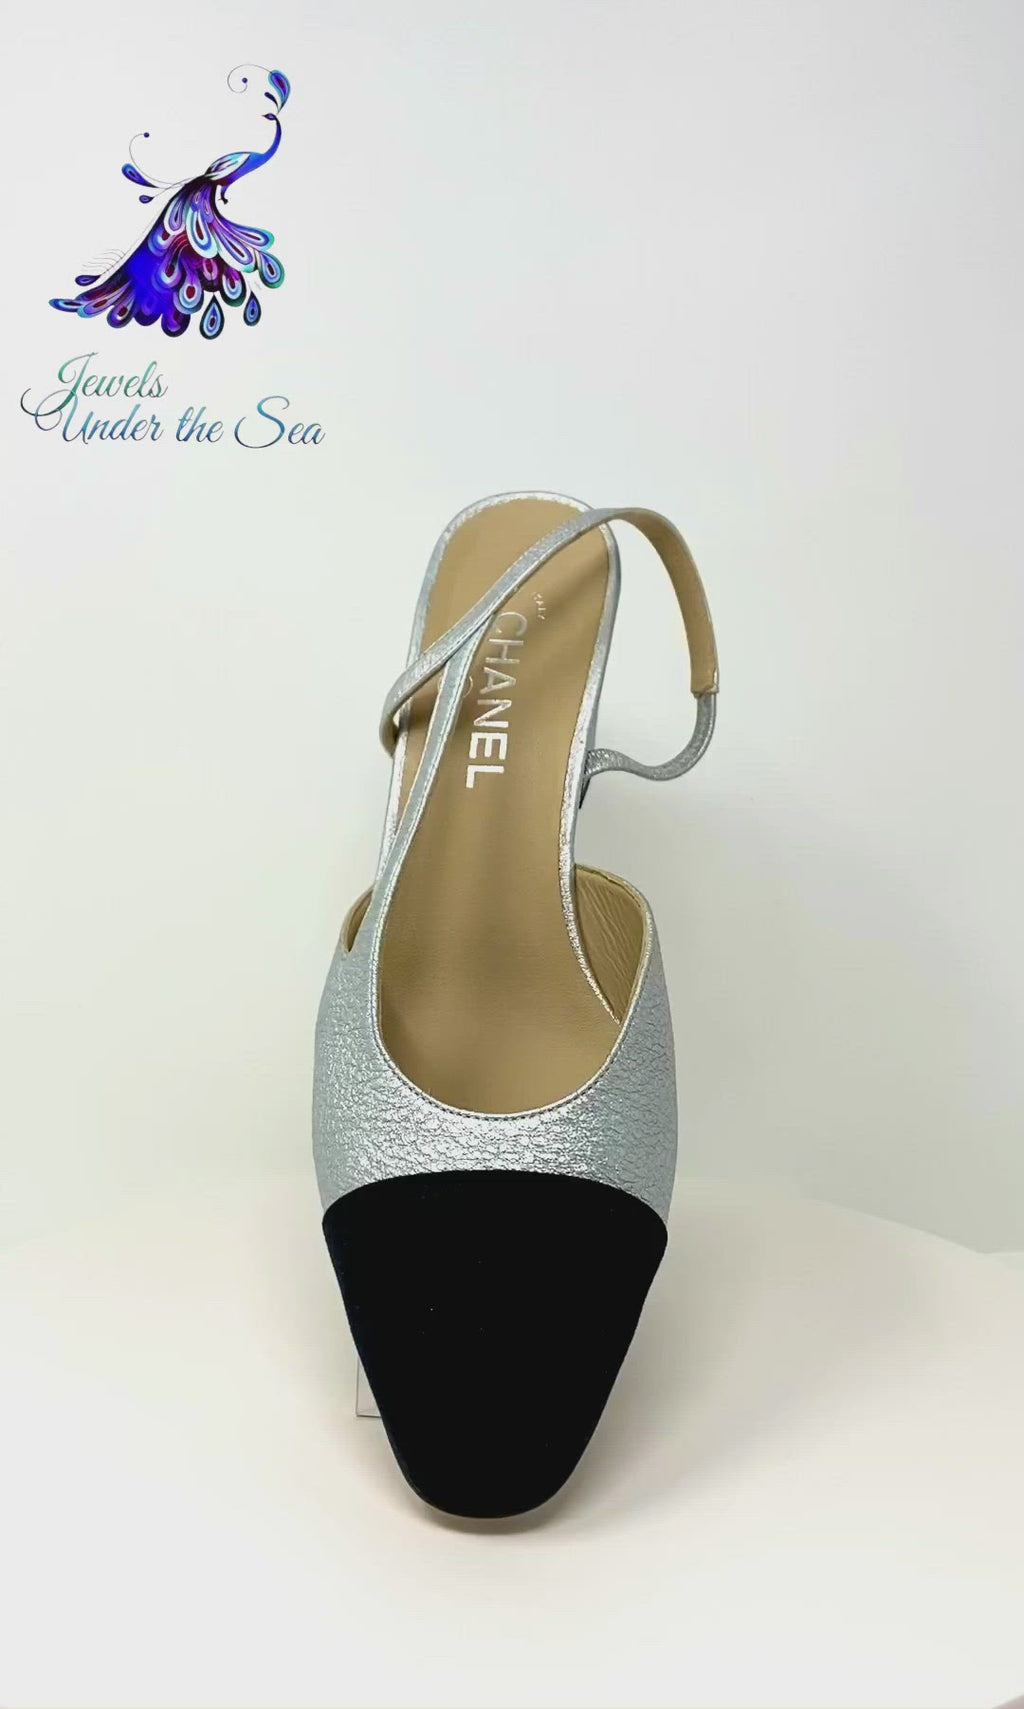 Chanel 22S G31318 Two-tone Slingback Heel Pumps 37-40 EUR sizes